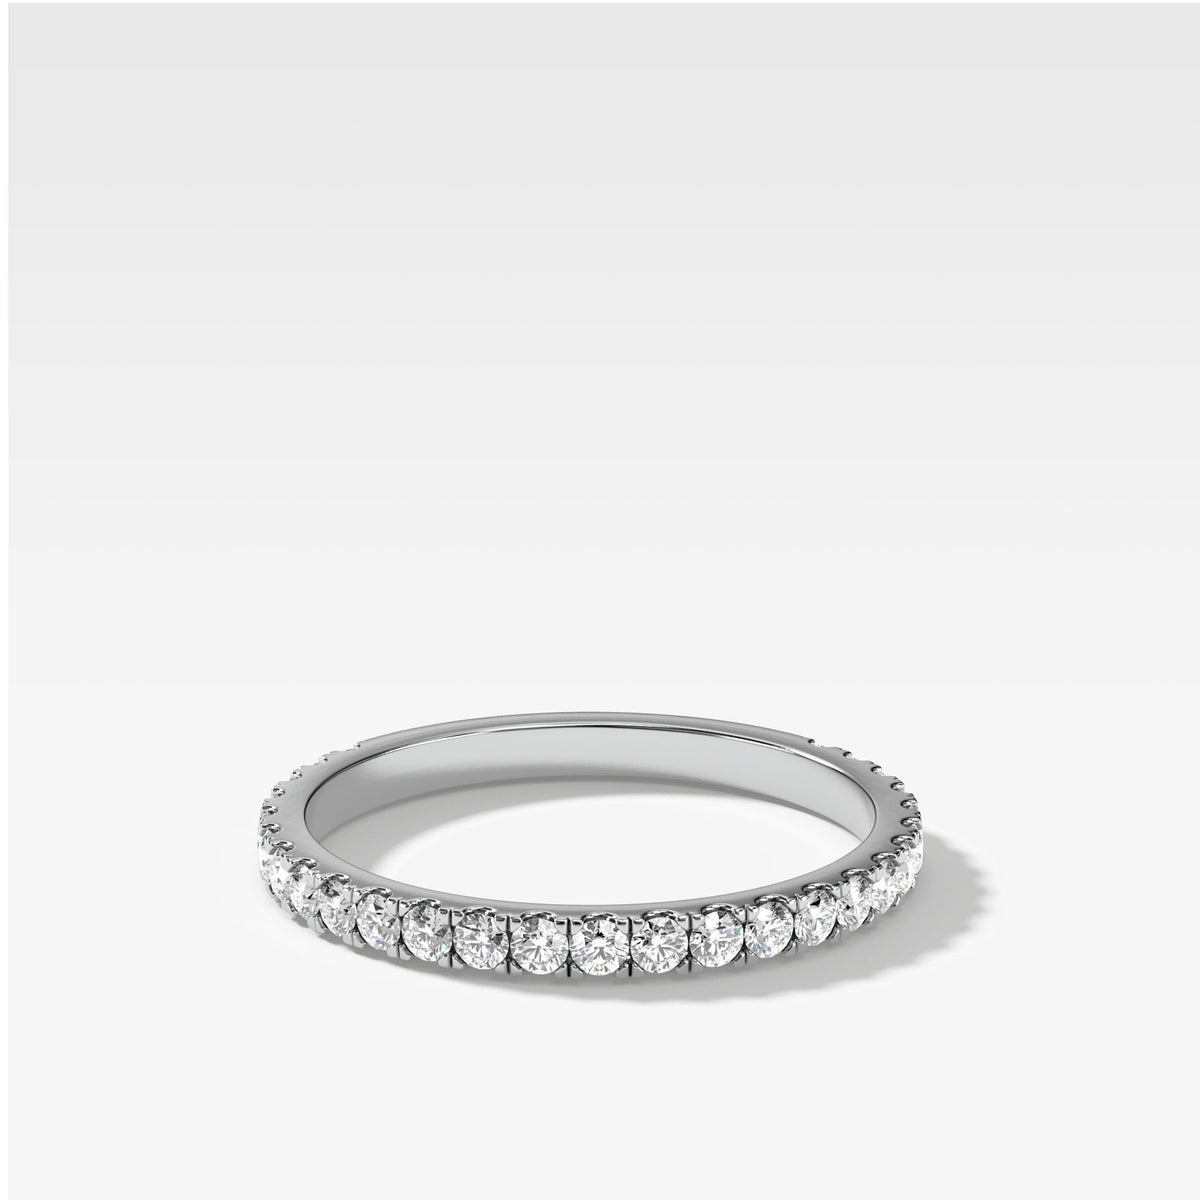 Classic Pavé Diamond Wedding Band by Good Stone in White Gold